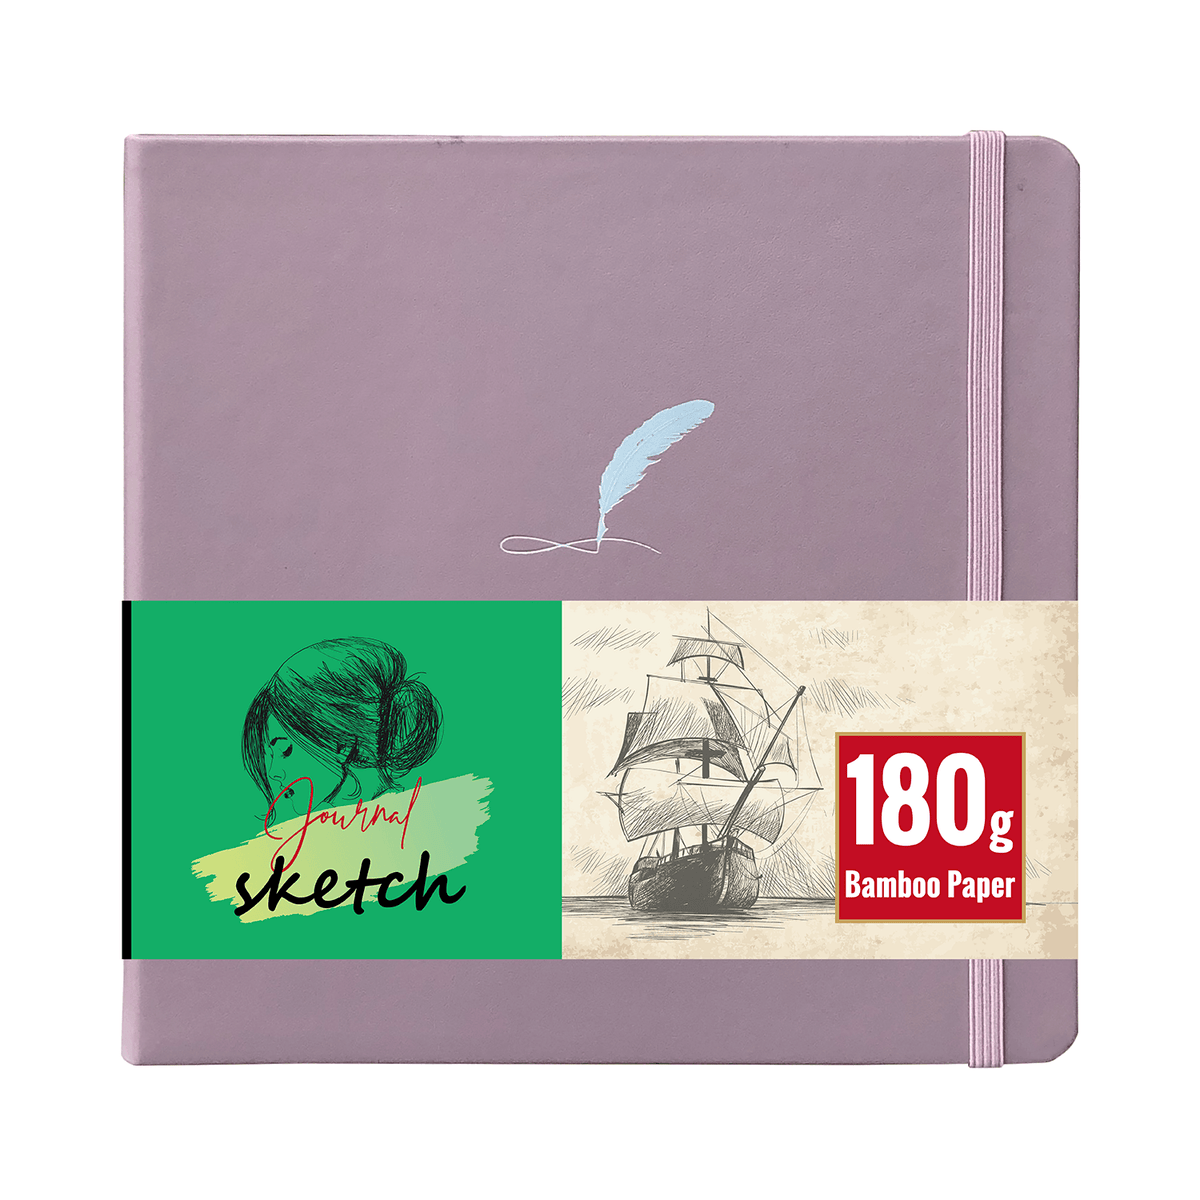 8X8 Square Hardcover SKetchbook Journal 180GSM Bamboo PAPER 128 Pages - Warn Apricot - bukenotebook